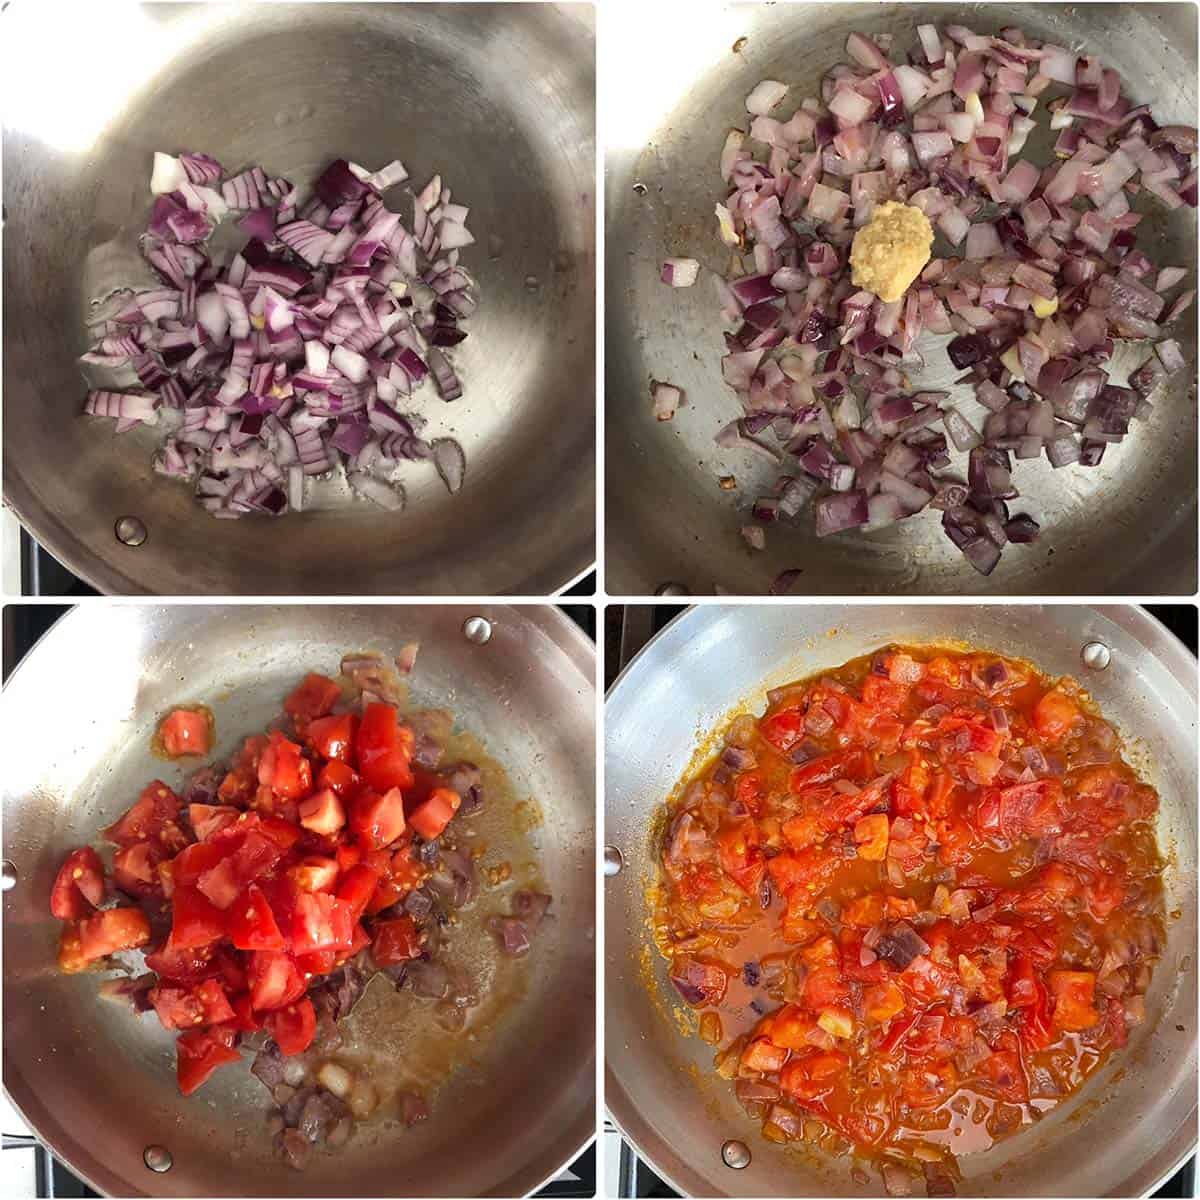 4 panel photo showing the sautéing onions and tomatoes.